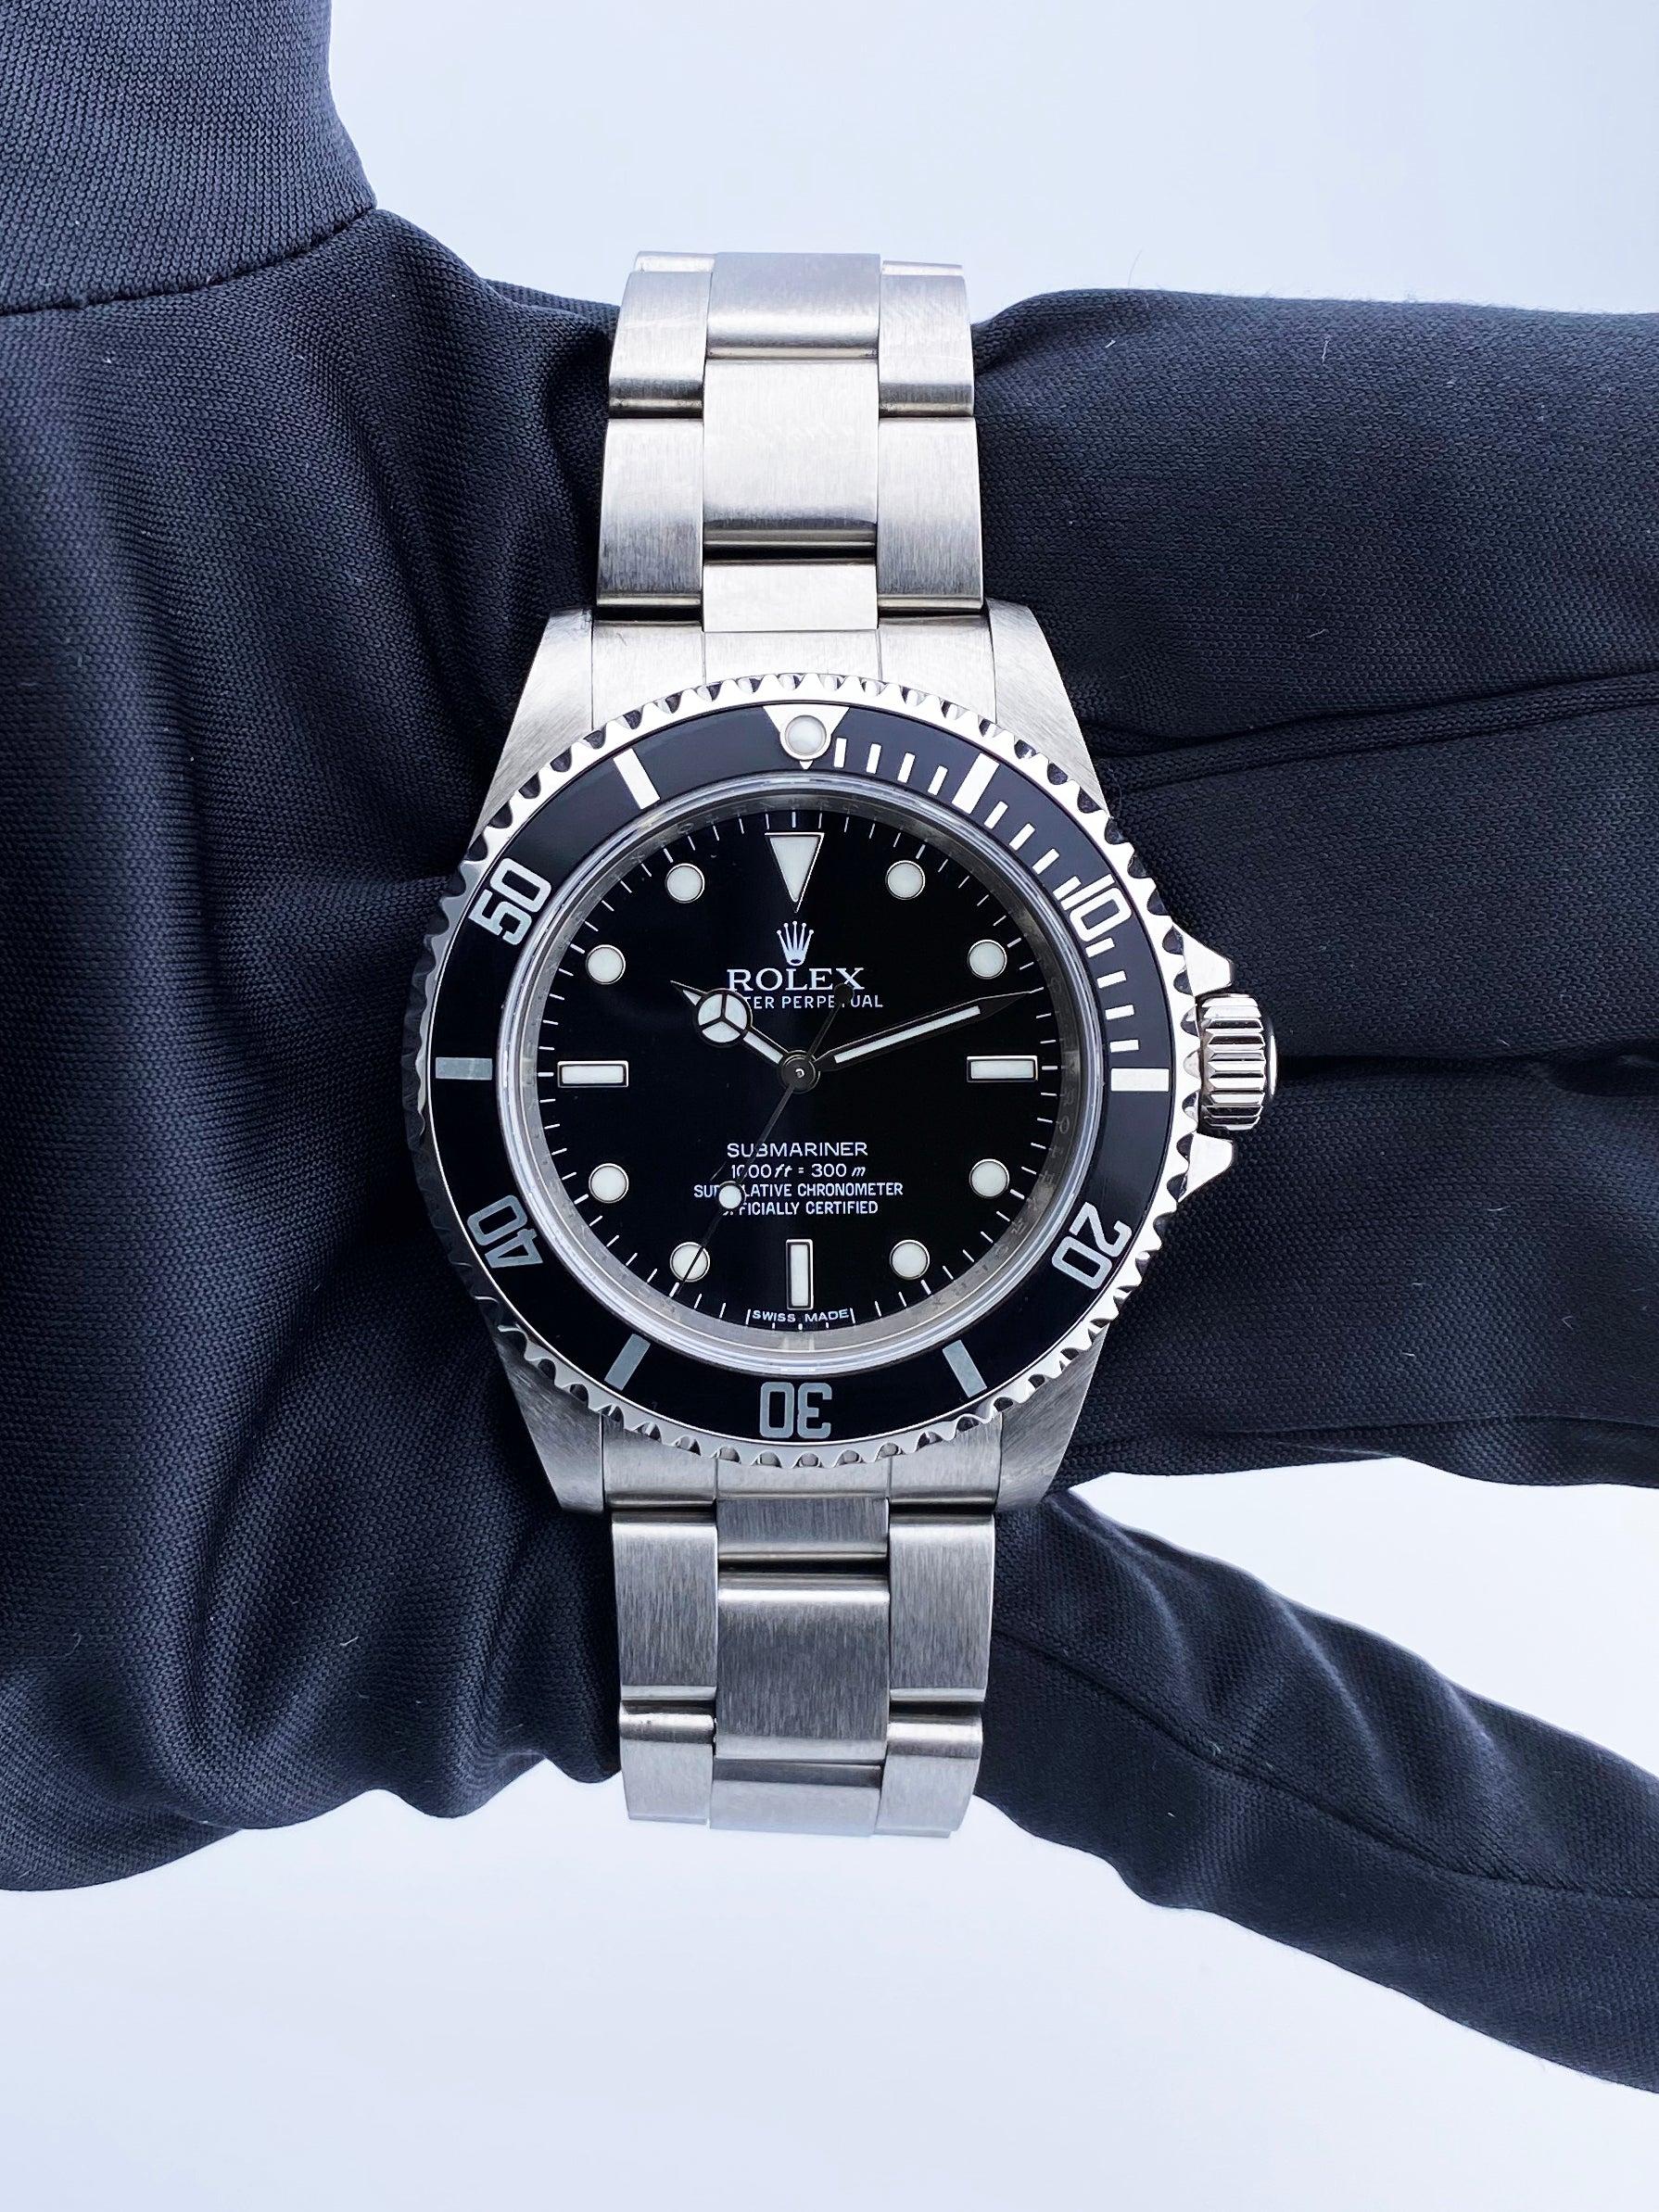 Rolex Oyster Perpetual Submariner 14060M Mens Watch. 40mm stainless steel case with unidirectional stainless steel bezel with black bezel insert. Black Dial with luminous Mercedes hands and luminous index hour markers. Minute markers on the